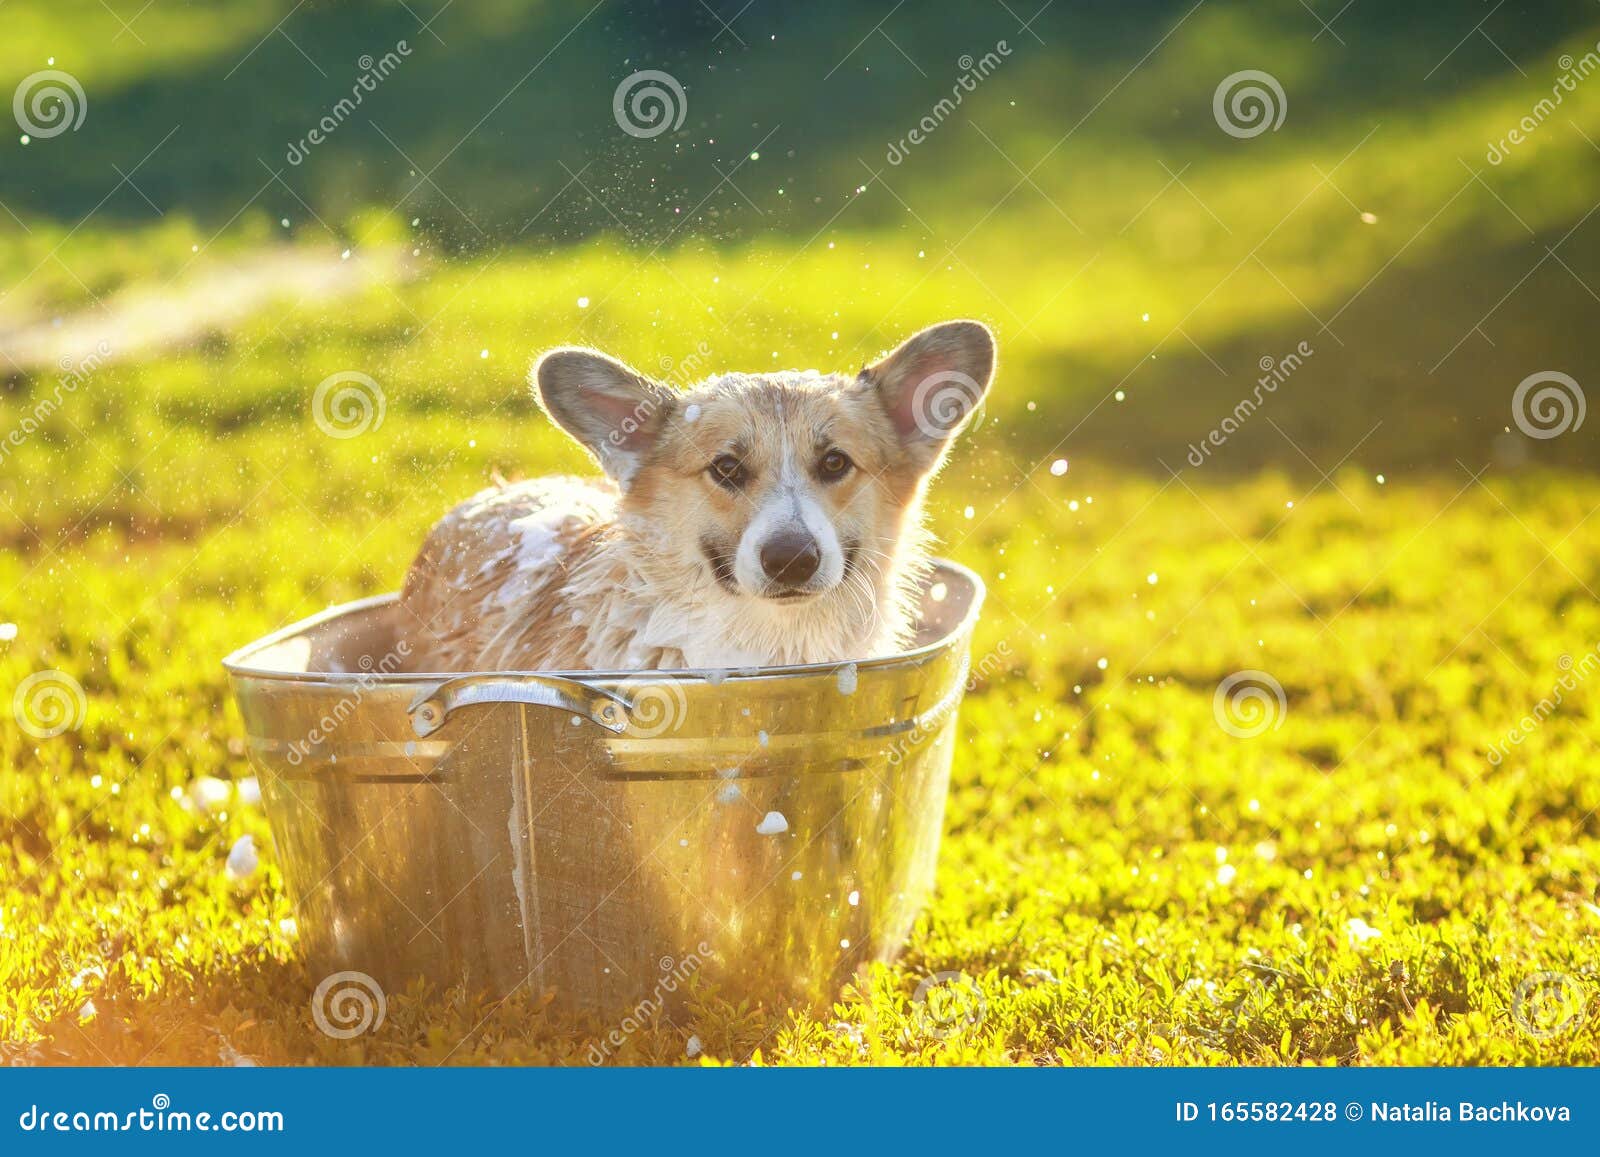 Red Corgi Dog Puppy with Big Ears Sitting in a Tub of Soap Suds Outside ...